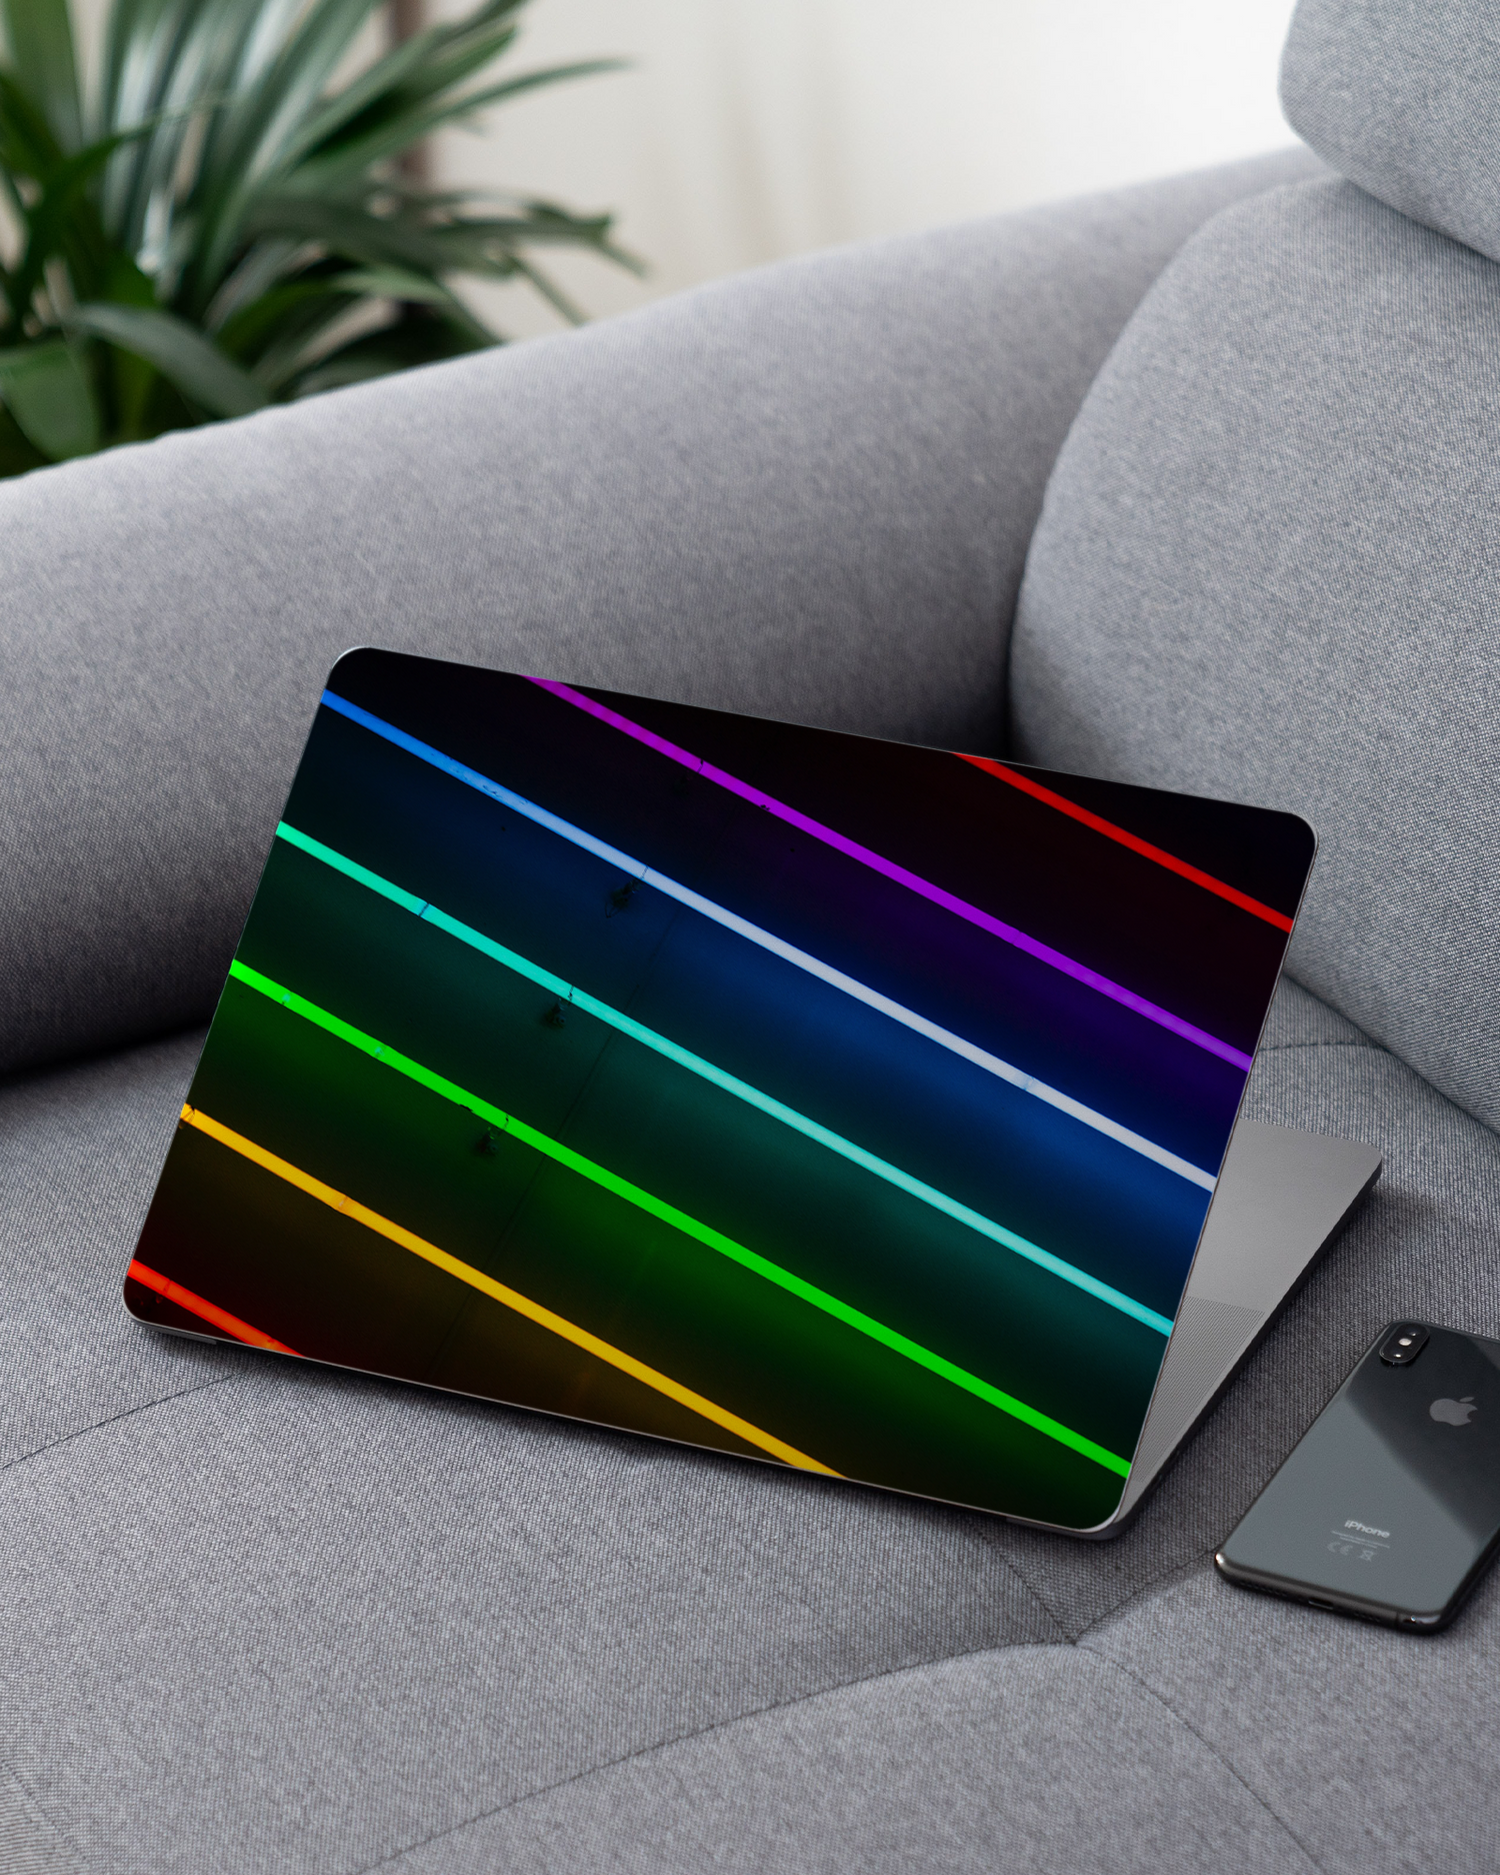 LGBTQ Laptop Skin for 13 inch Apple MacBooks on a couch